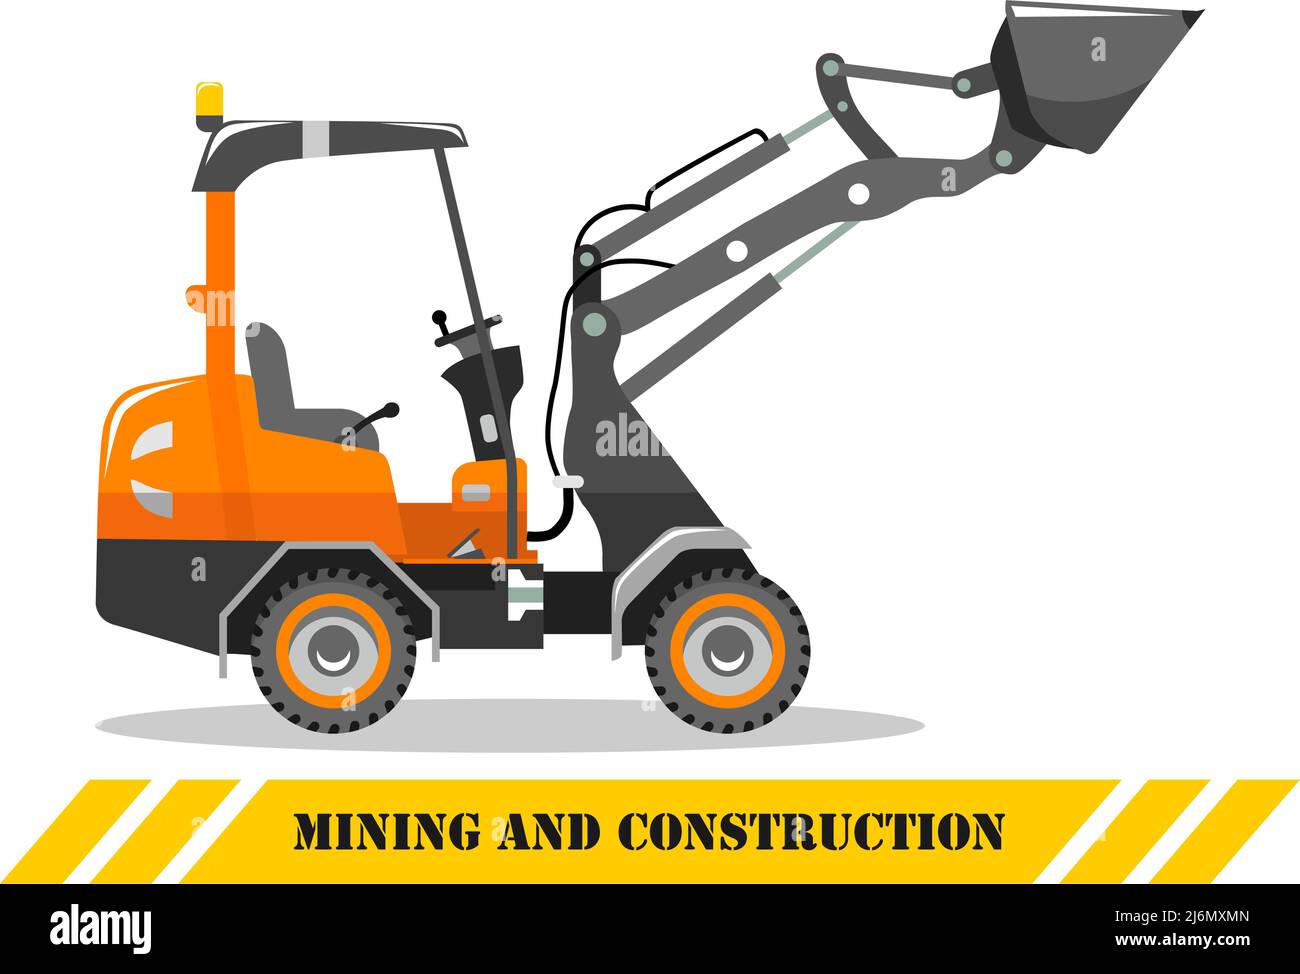 Detailed illustration of skid steer loader. Heavy mining machine equipmente and construction machinery. Vector illustration. Stock Vector